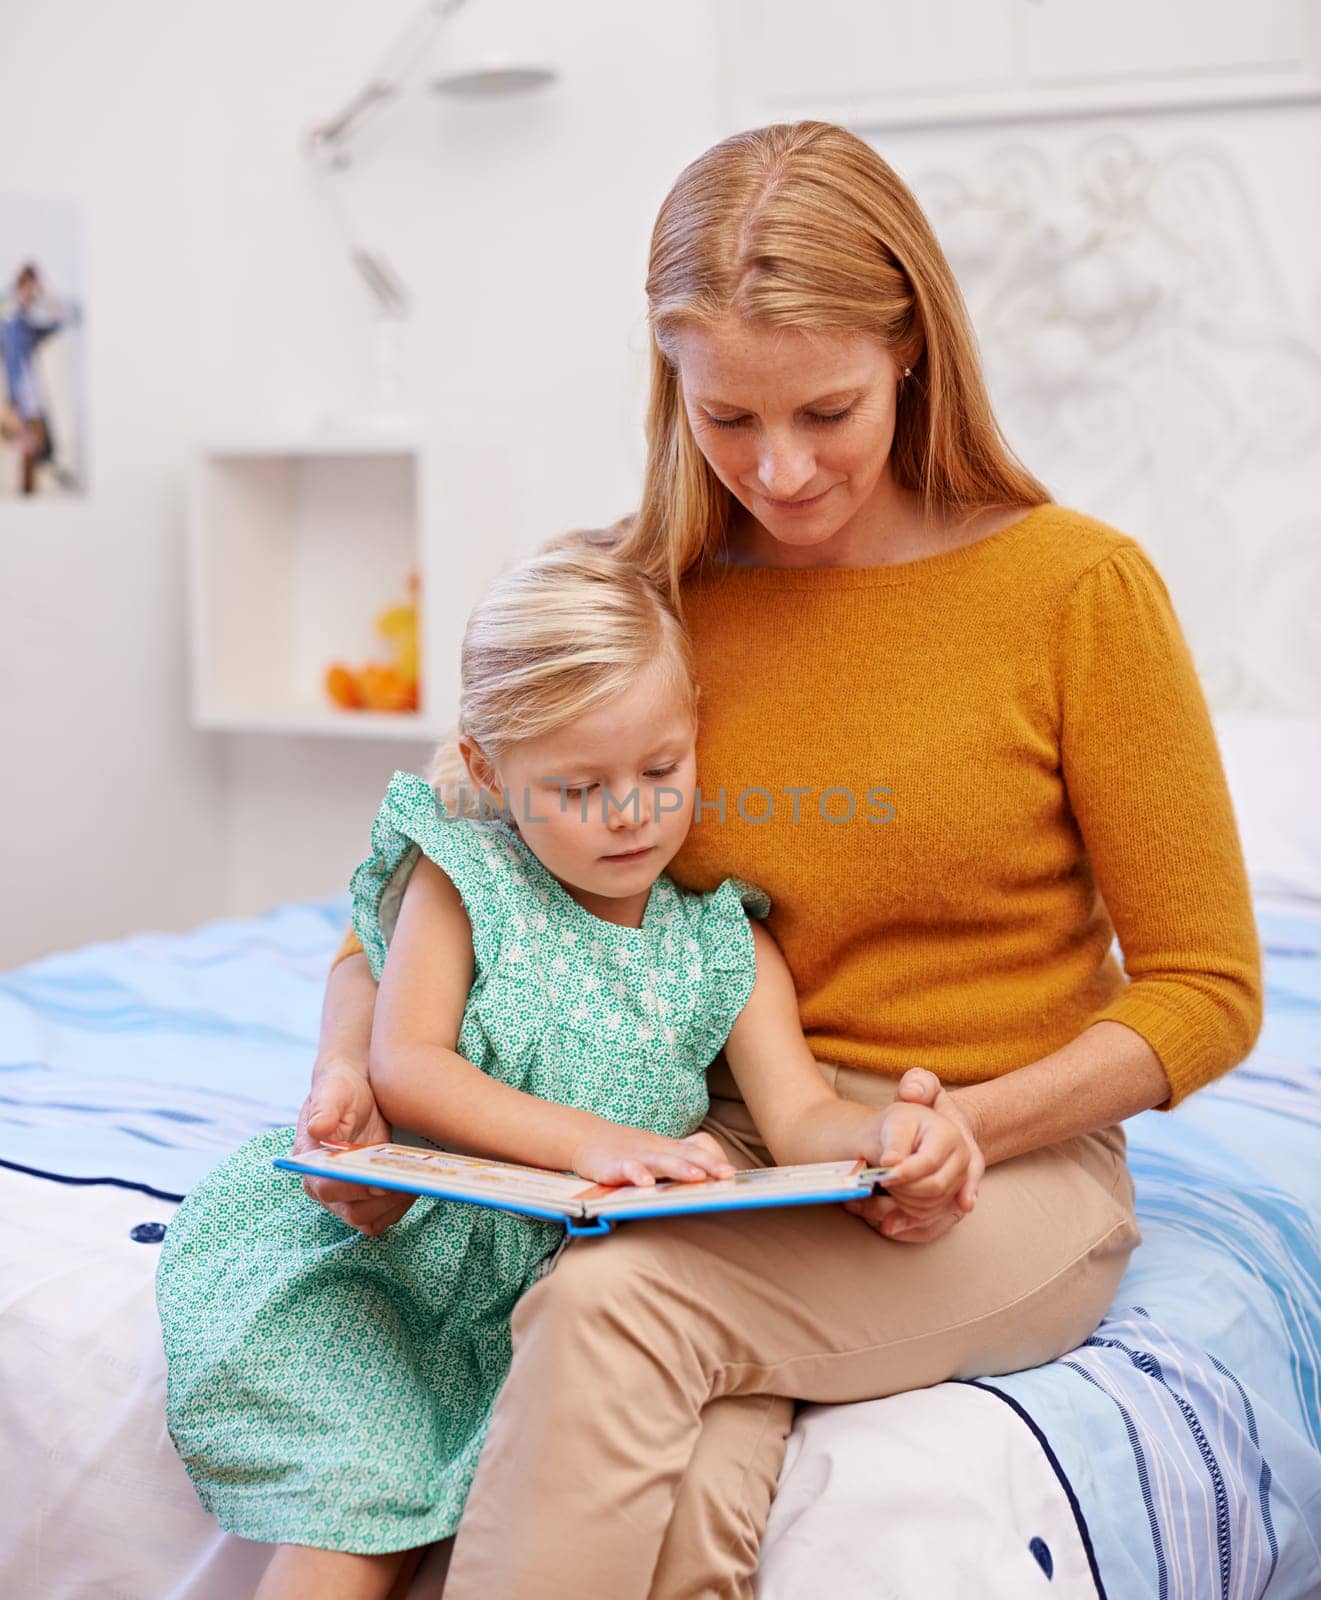 Mother, child and kids book for bed in bedroom at family home with fantasy story for development. Love, care and support of a mom with a young girl together with bonding and reading for education.